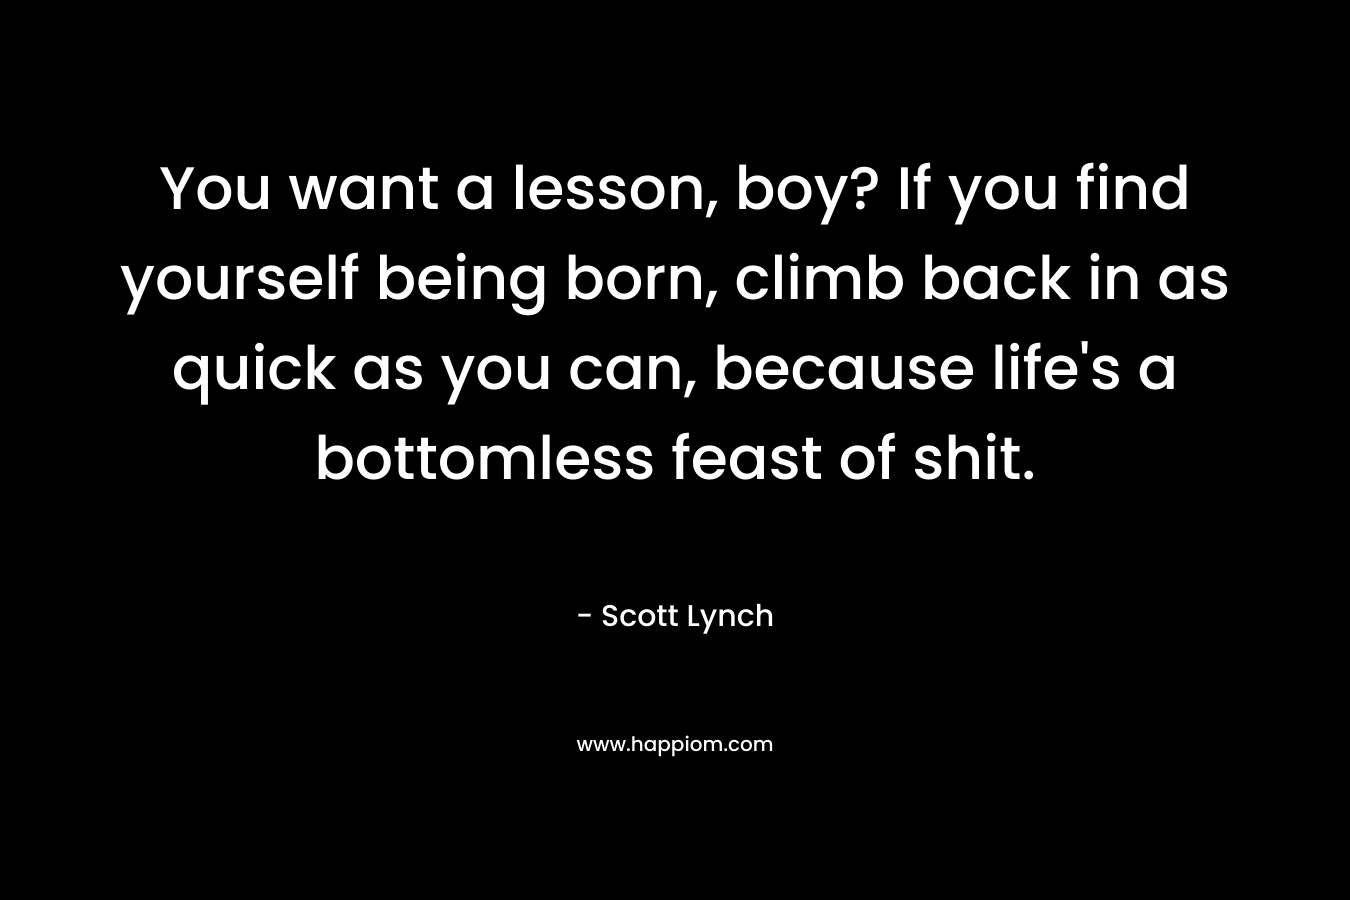 You want a lesson, boy? If you find yourself being born, climb back in as quick as you can, because life's a bottomless feast of shit.